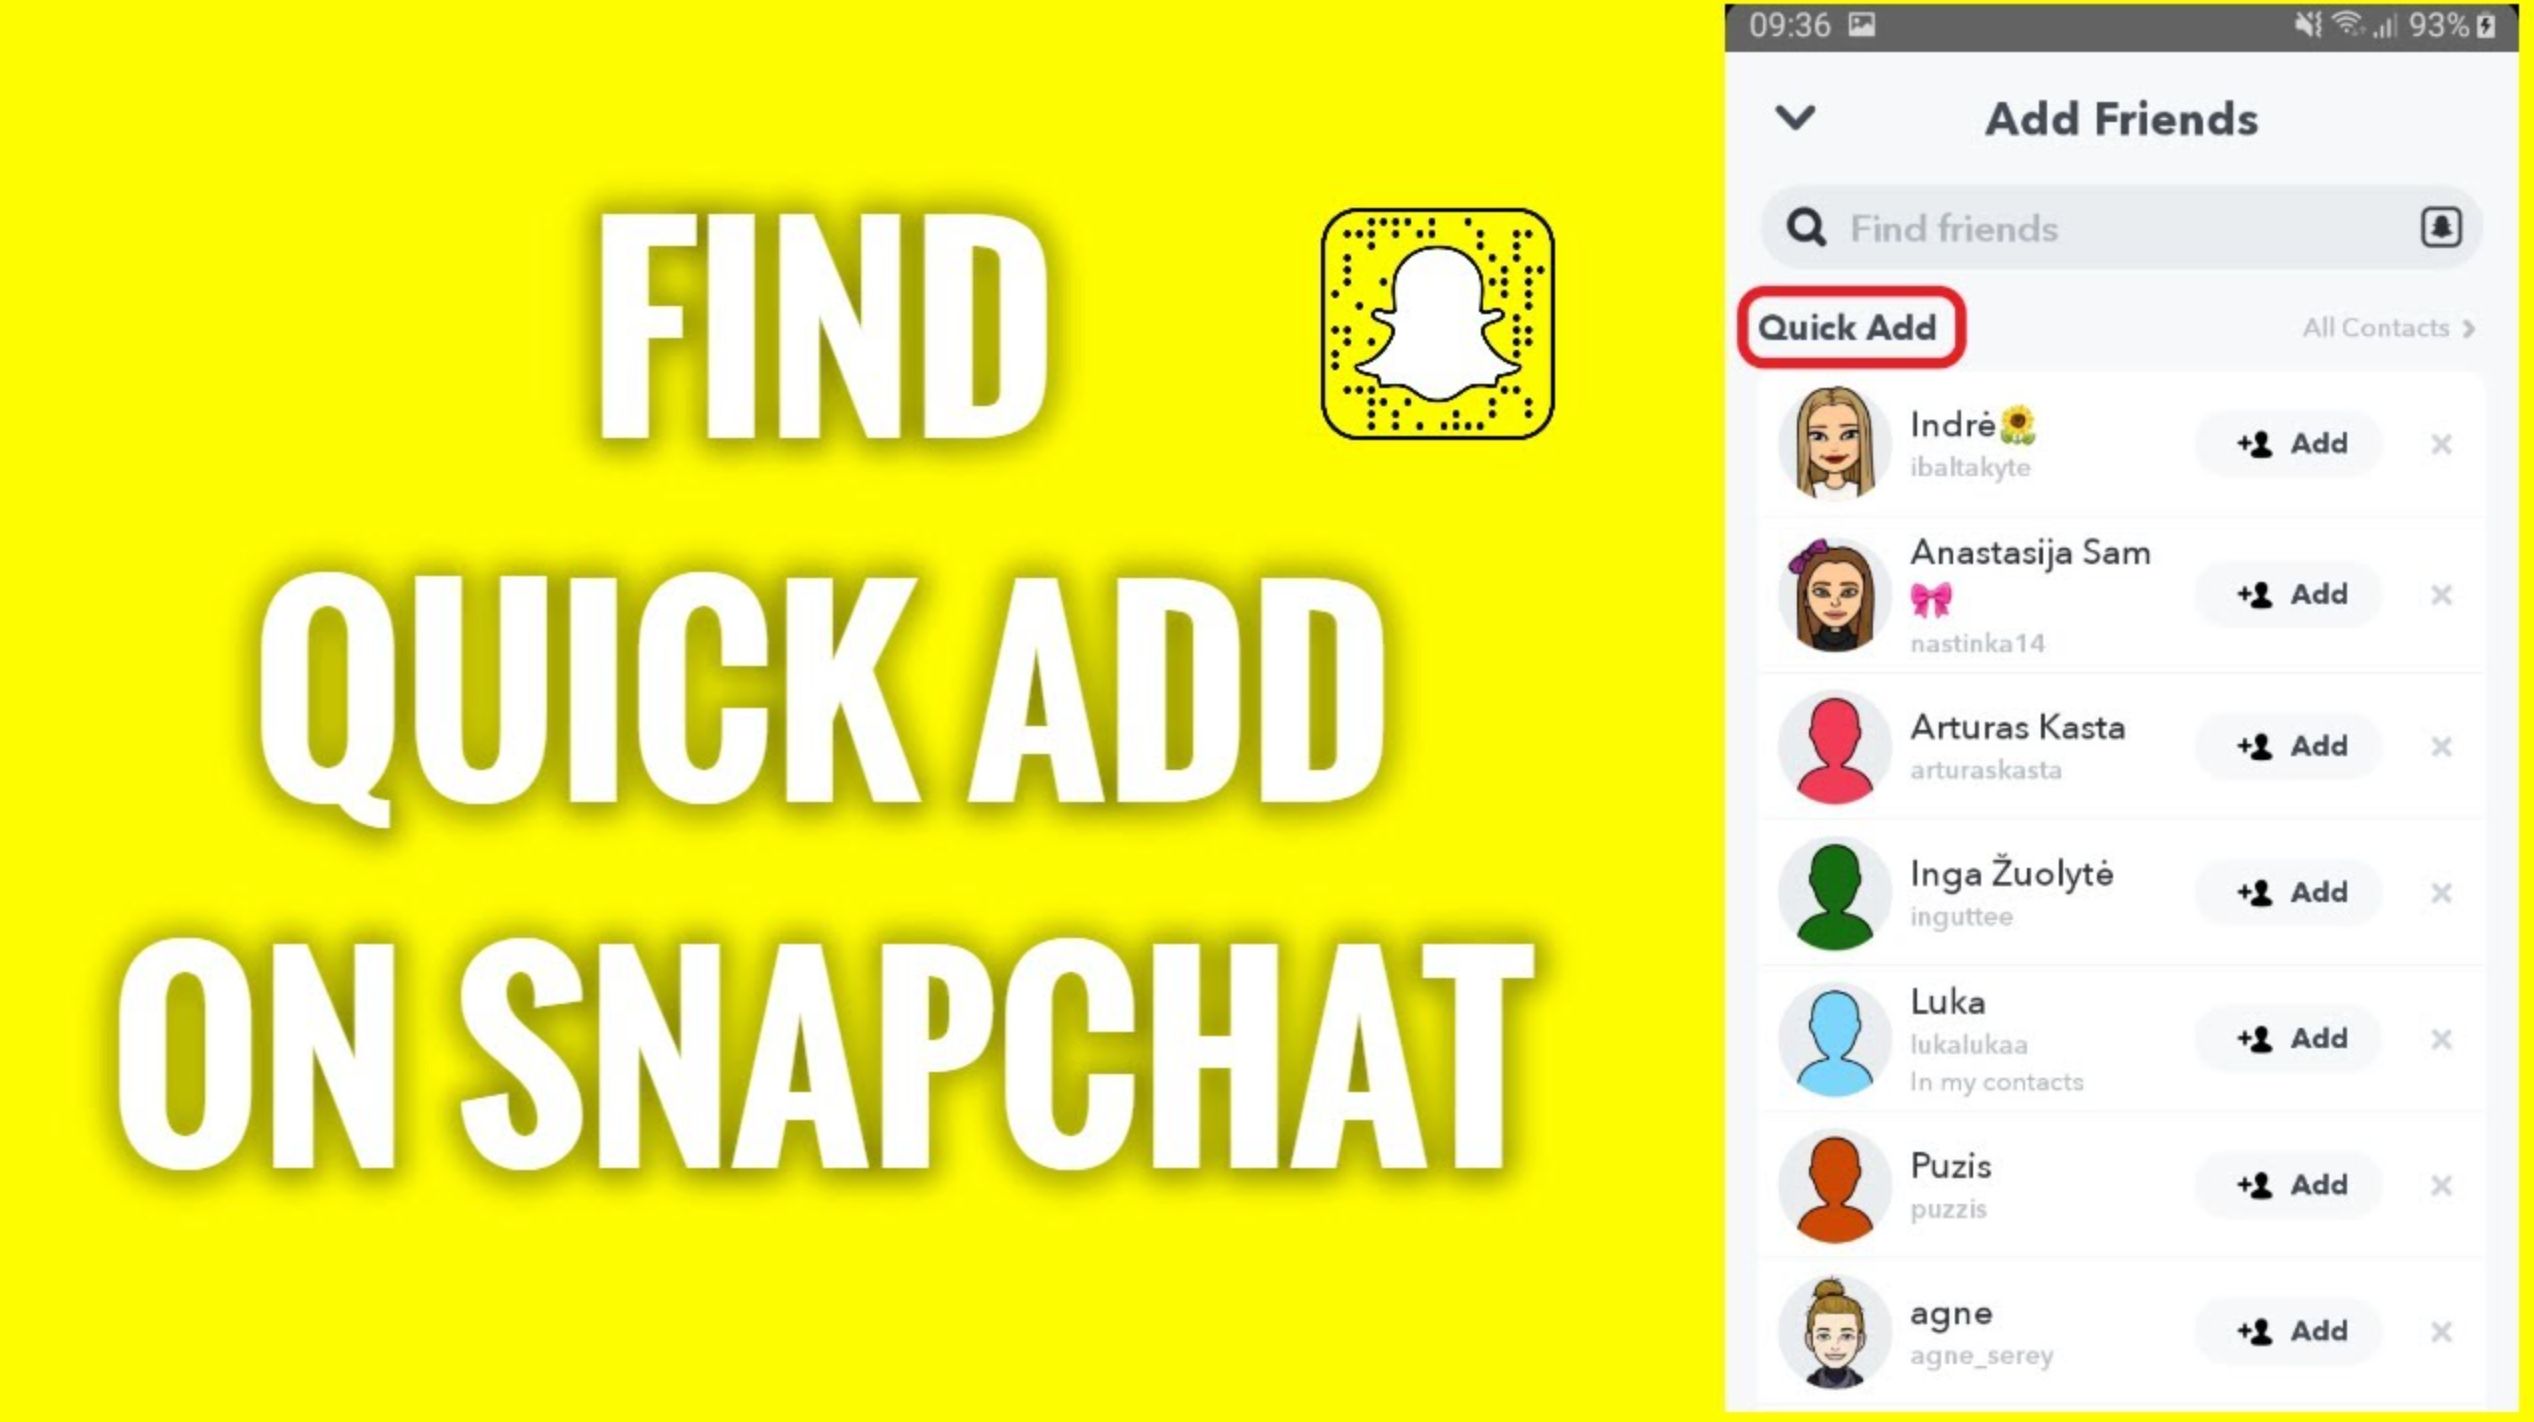 What Is Quick Add On Snapchat